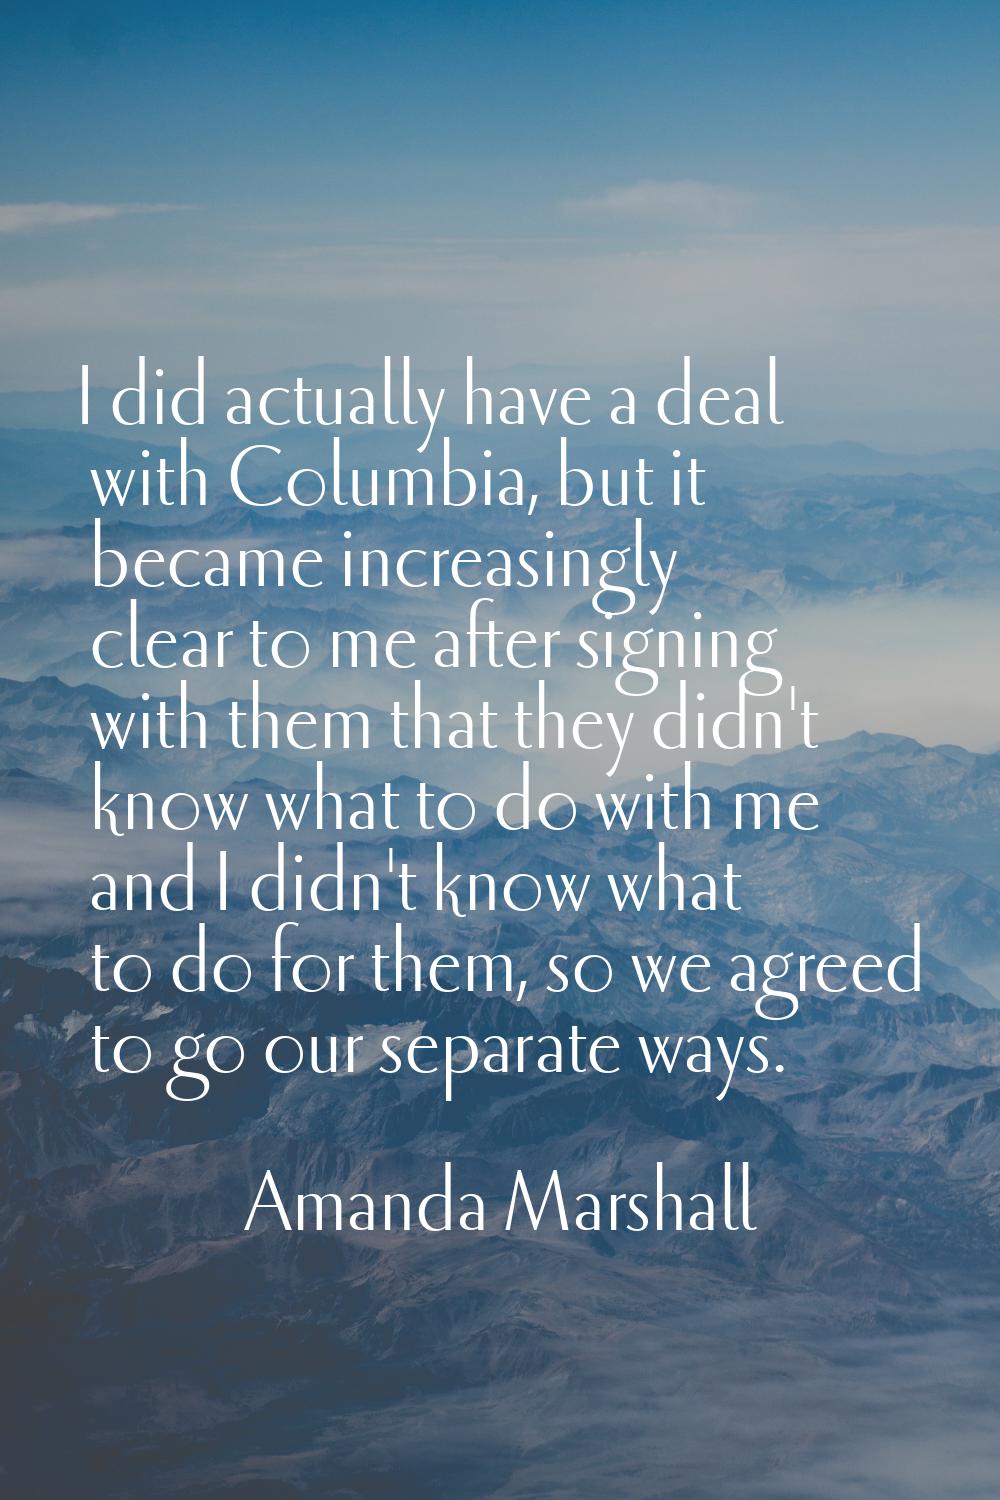 I did actually have a deal with Columbia, but it became increasingly clear to me after signing with